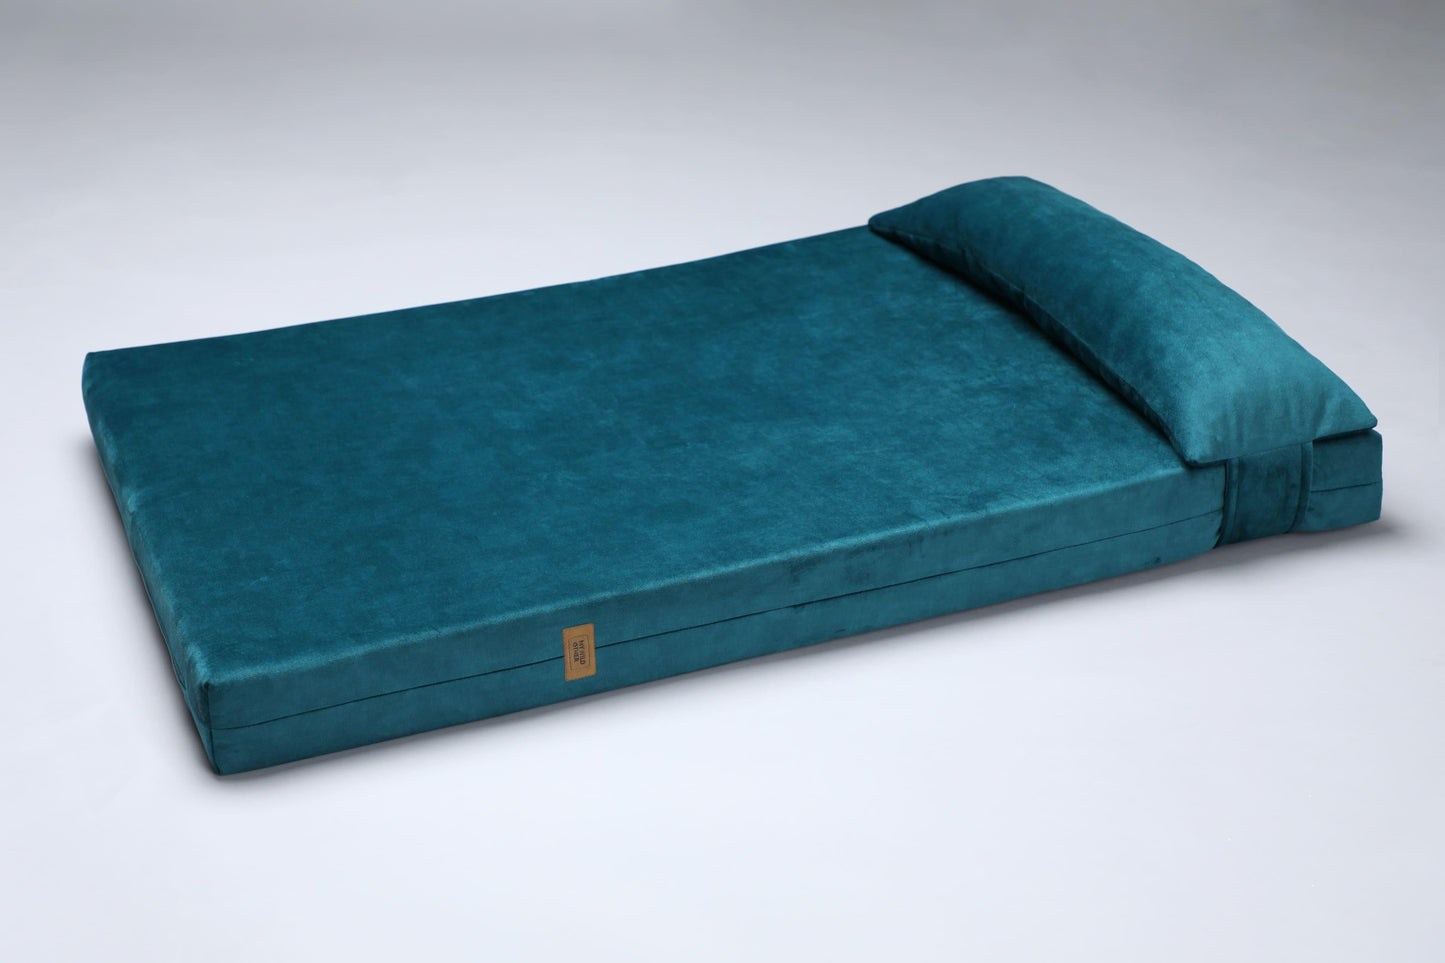 Dog bed for large dogs | Extra comfort & support | 2-sided | OCEAN BLUE - premium dog goods handmade in Europe by My Wild Other